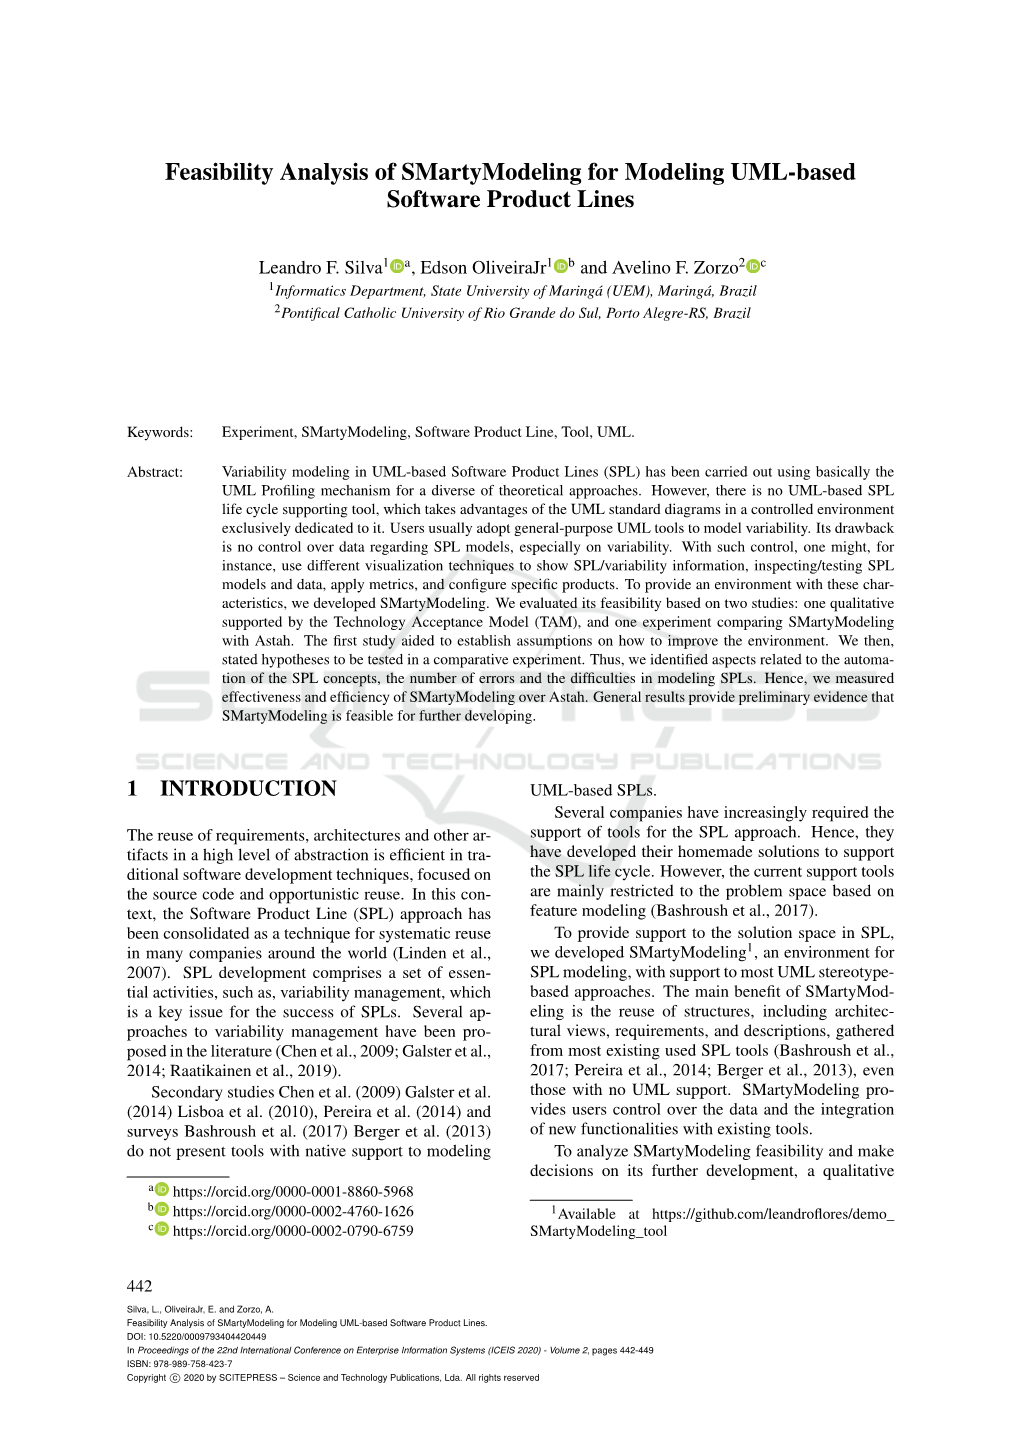 Feasibility Analysis of Smartymodeling for Modeling UML-Based Software Product Lines